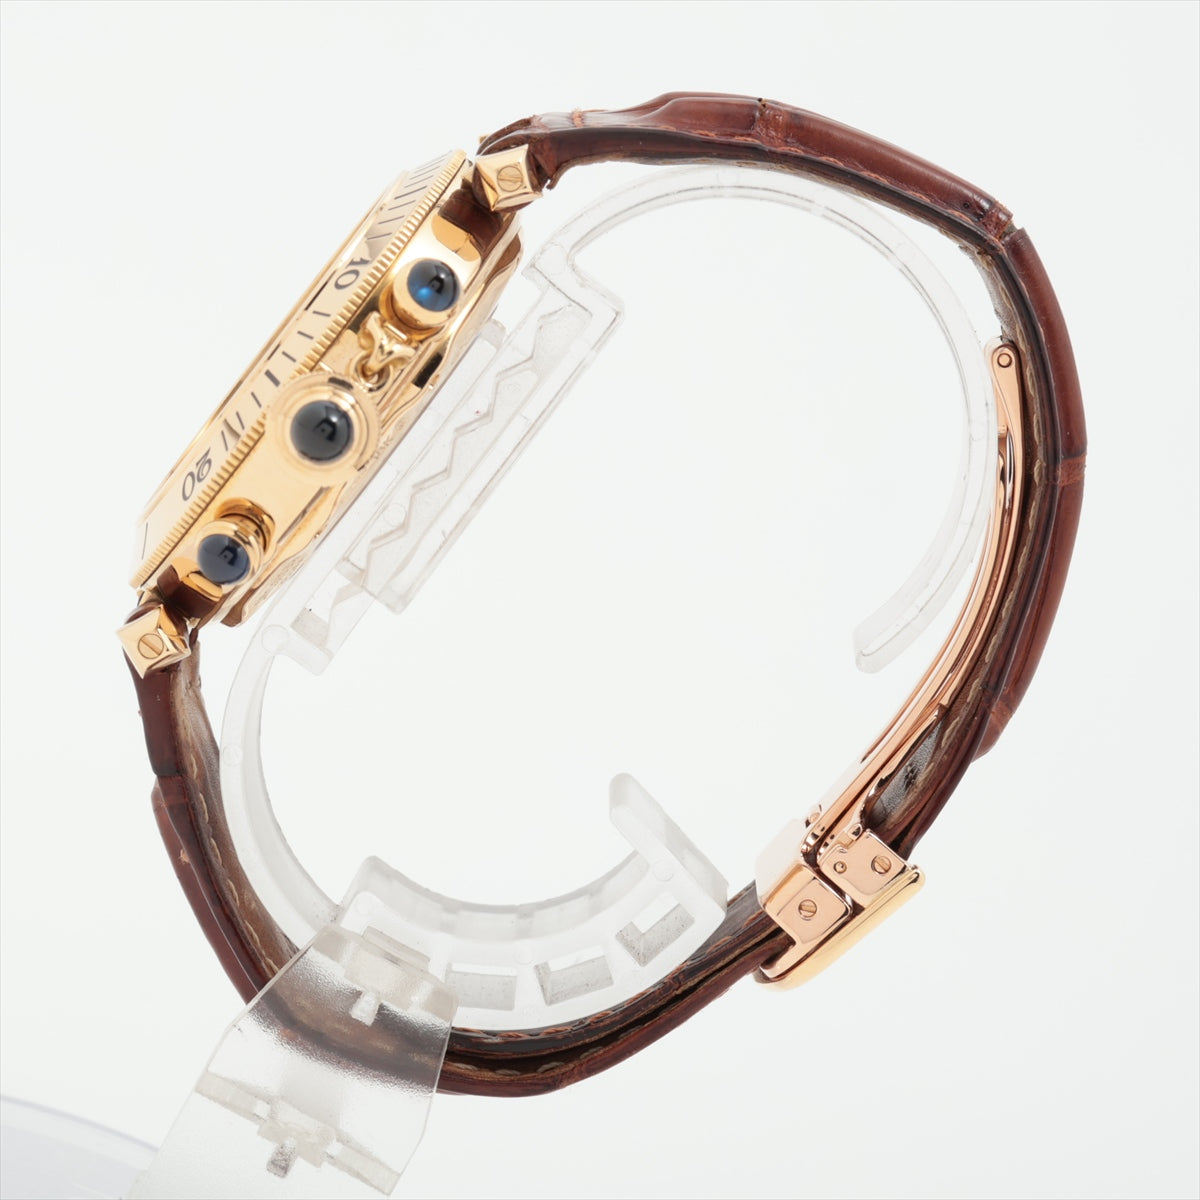 Cartier Pasha W3007751 YG  leather AT silver sign plate leather belt colored rugged mountain cut